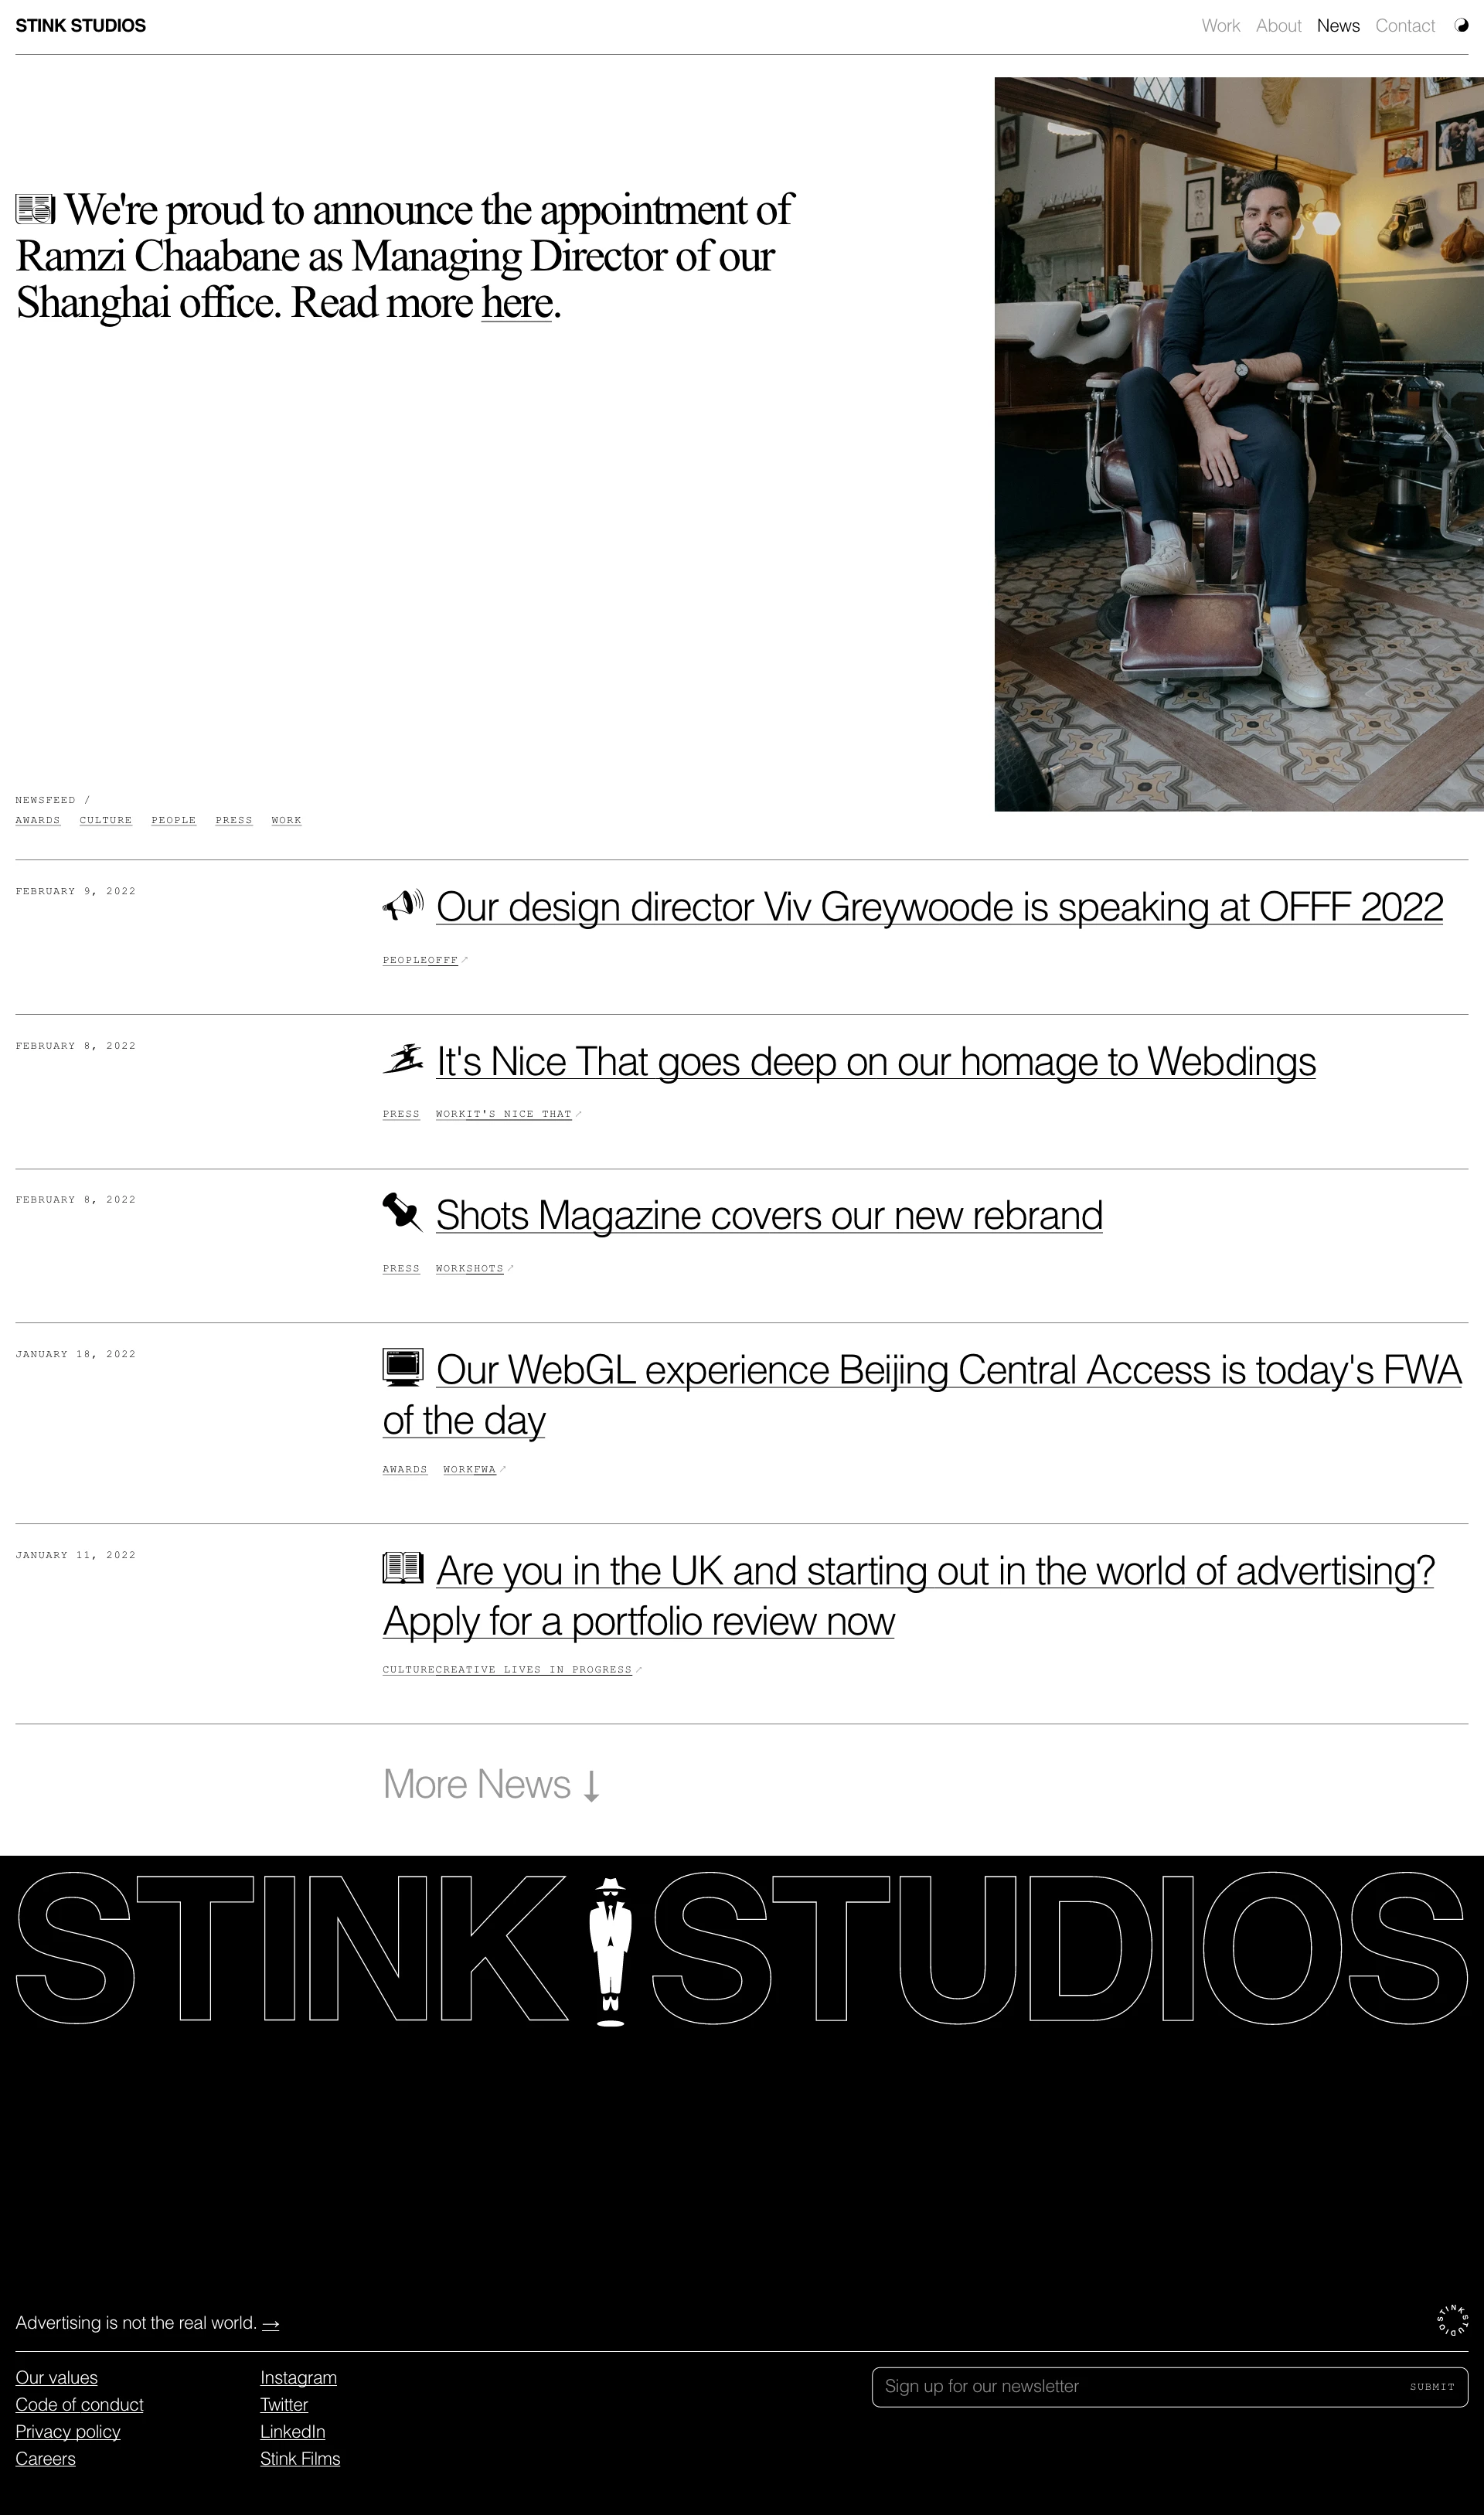 Stink Studios Landing Page Example: Stink Studios is a creative studio that moves fluidly between brand and digital customer experience.